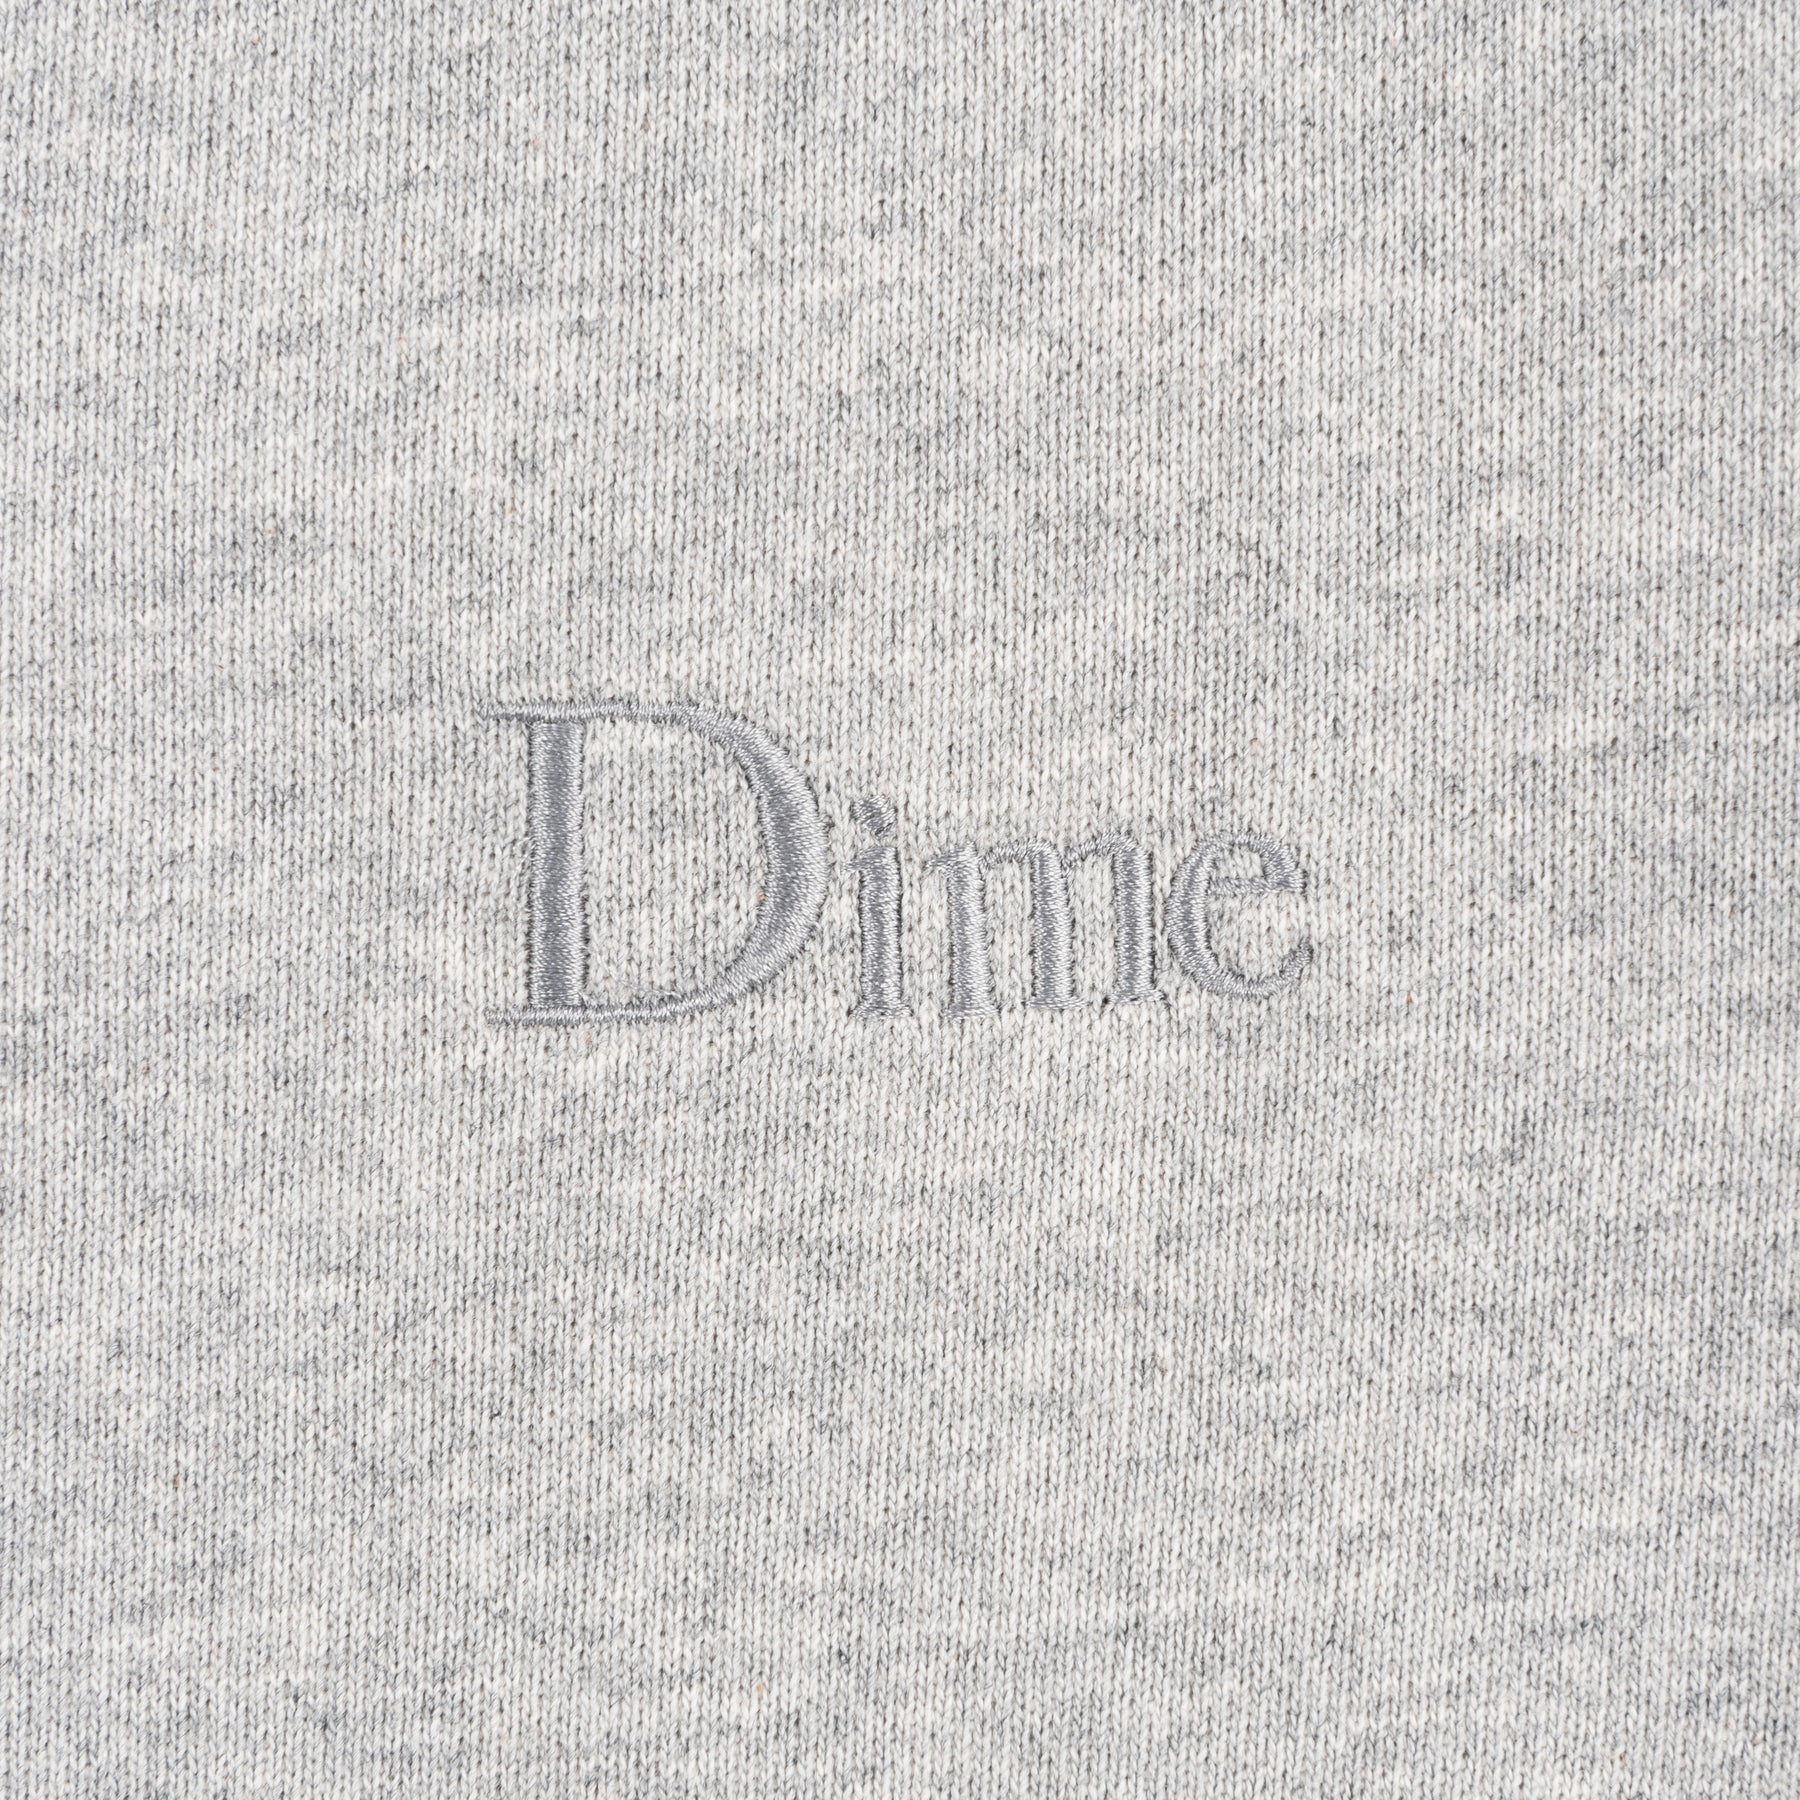 DIME CLASSIC SMALL LOGO HOODIE｜HEATHER GRAY